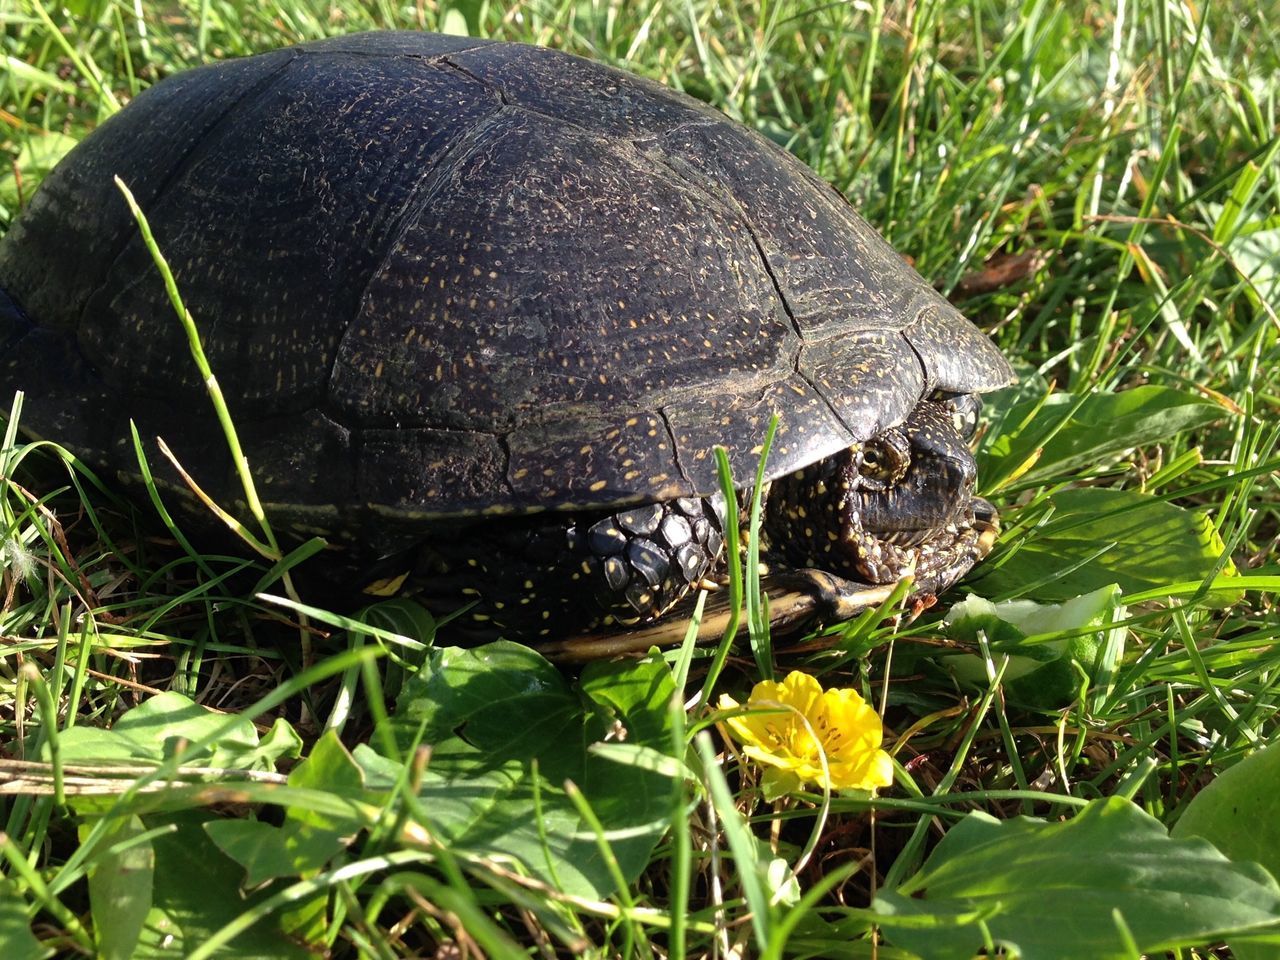 tortoise, one animal, animals in the wild, reptile, tortoise shell, animal themes, turtle, animal wildlife, day, nature, grass, green color, leaf, outdoors, no people, close-up, full length, beauty in nature